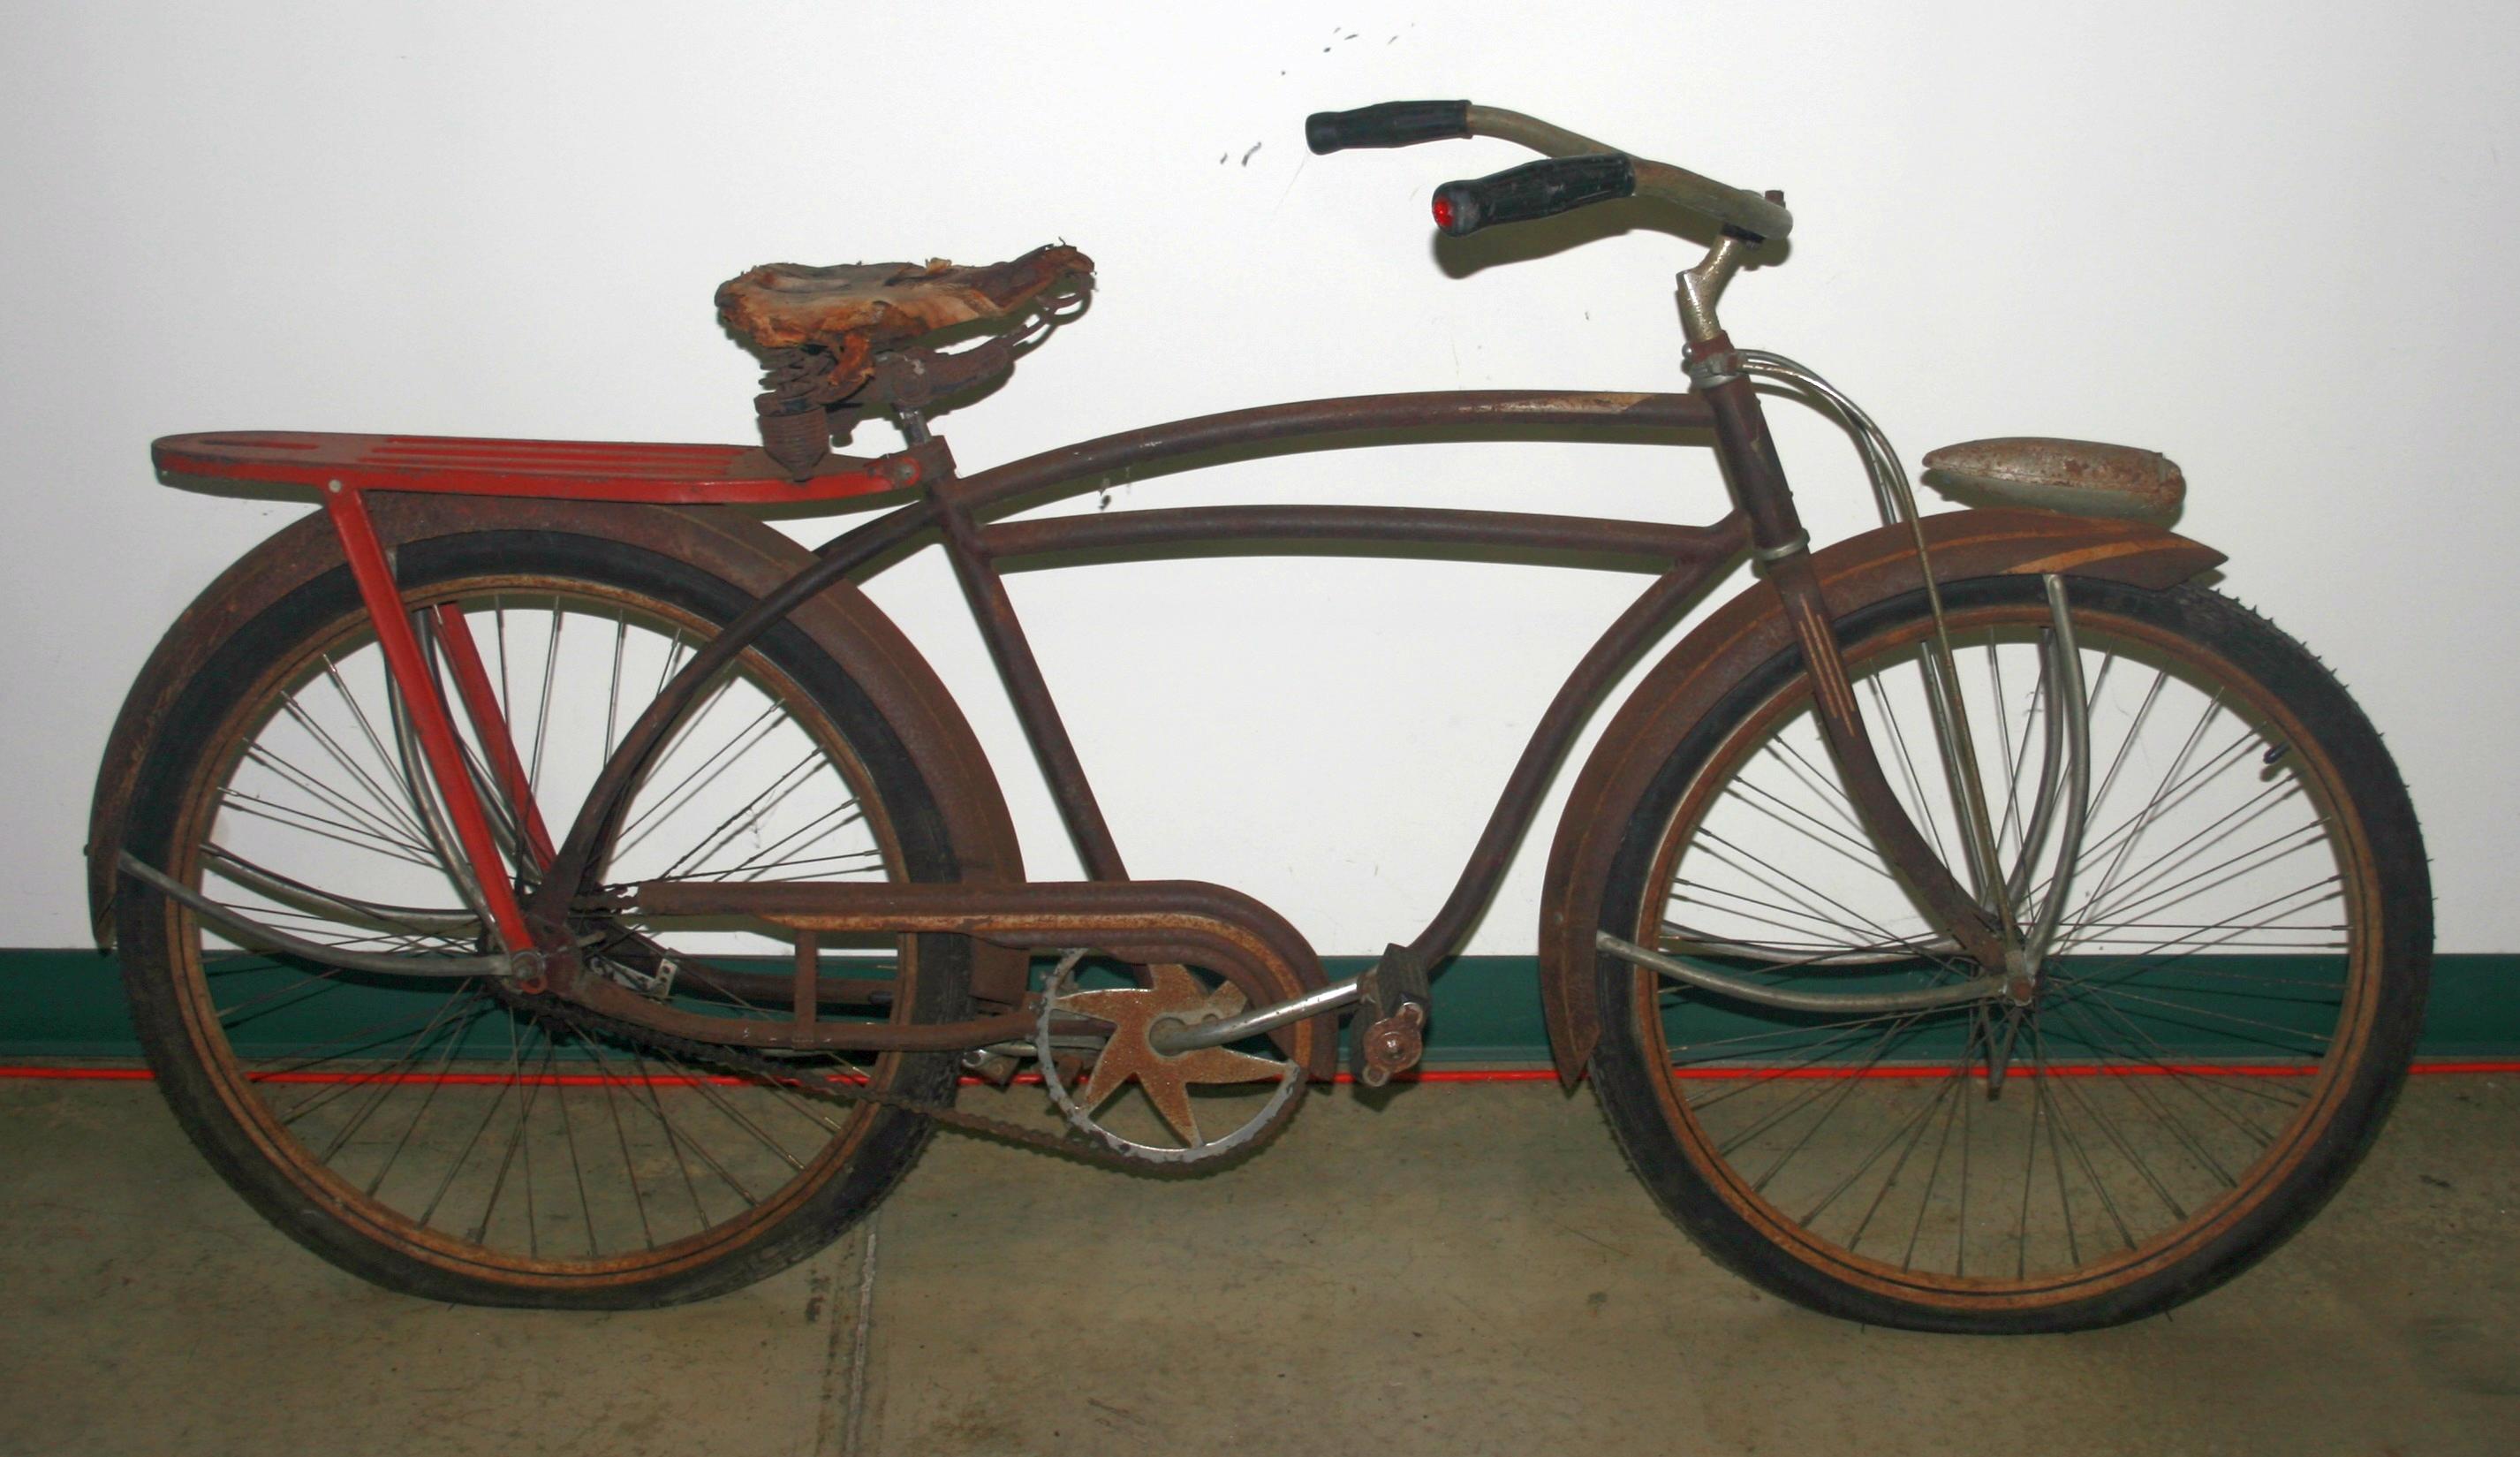 Bonhams Cars : A MONTGOMERY WARD HAWTHORNE 'VICTORY' BICYCLE, EARLY 1940S,